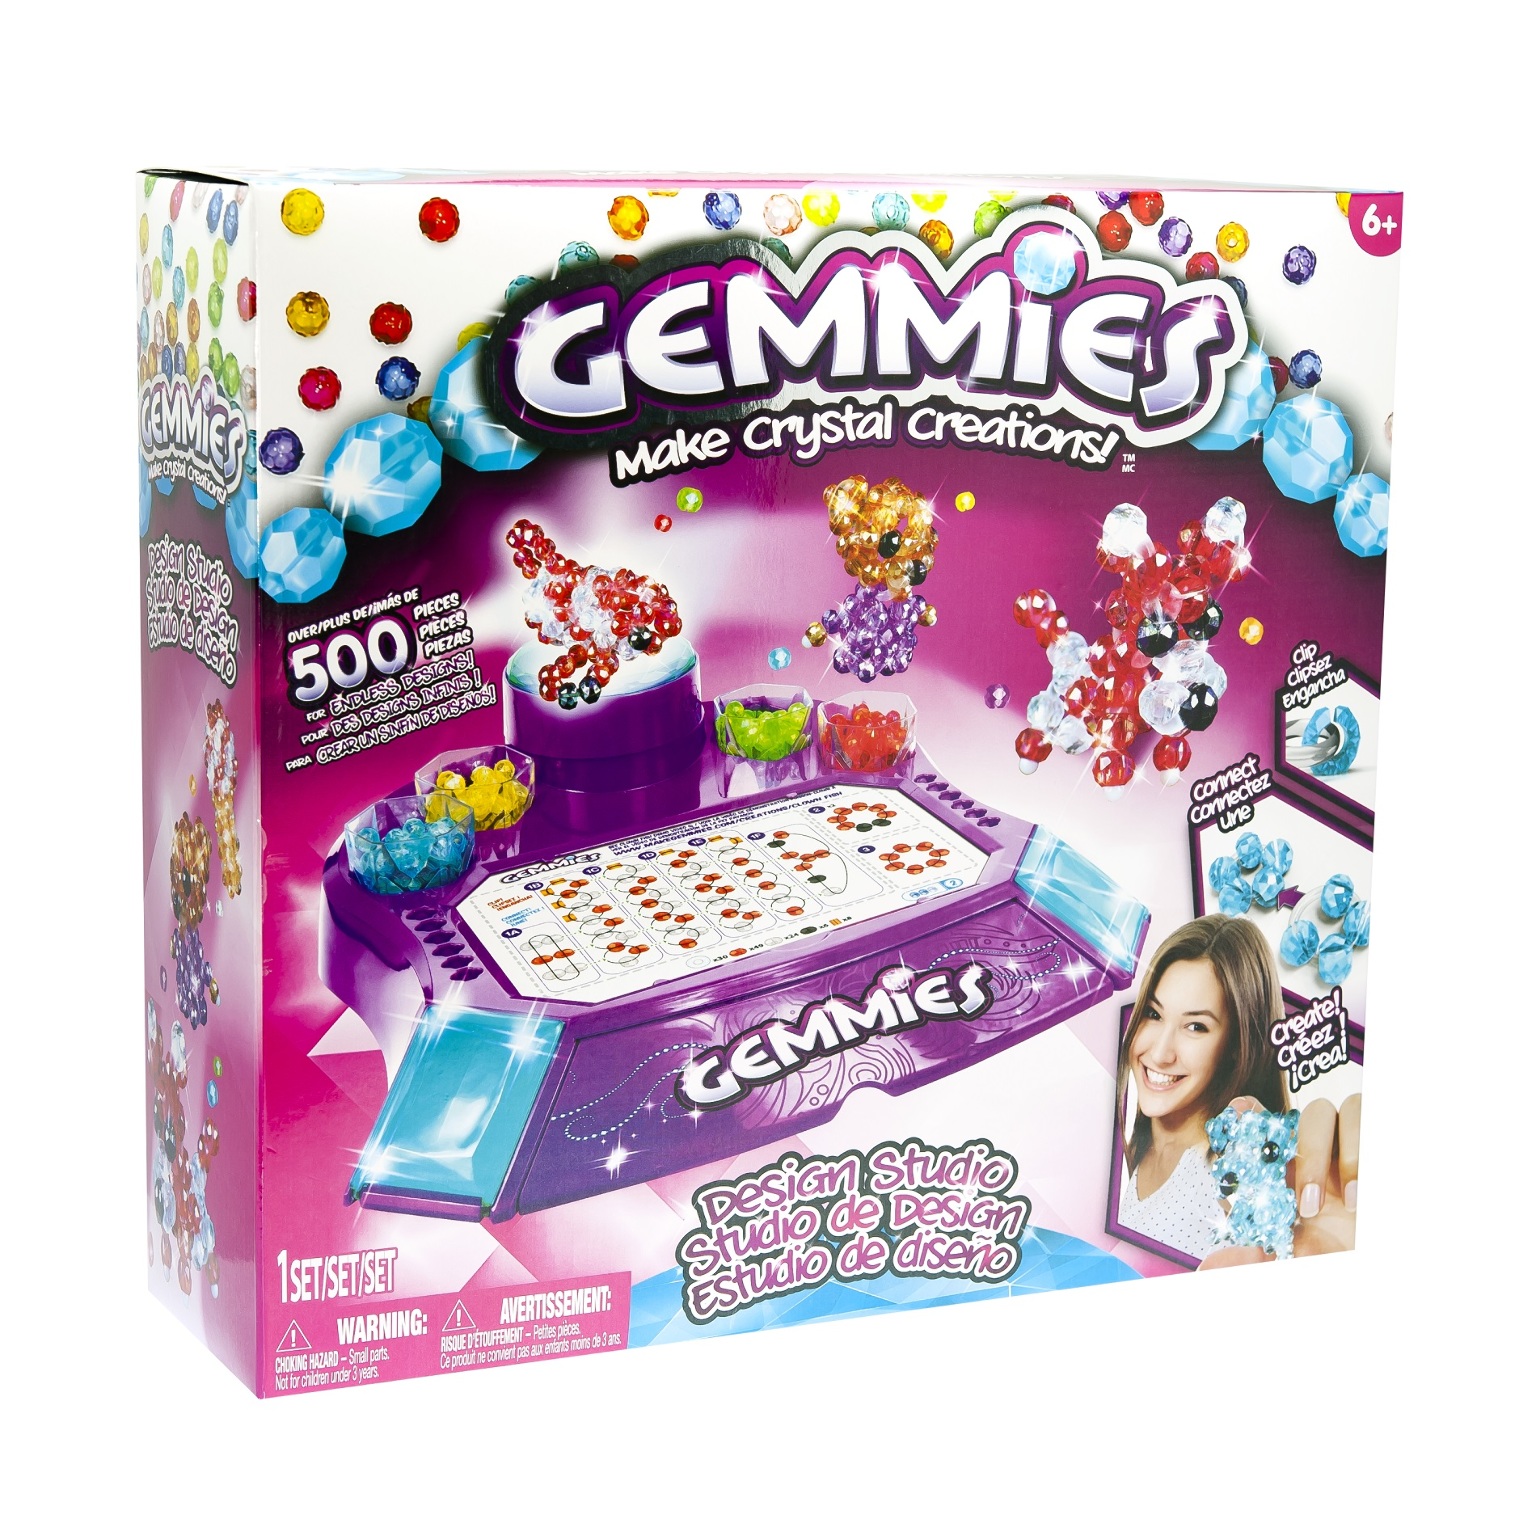 The Gemmies, Assorted Crystal Candy